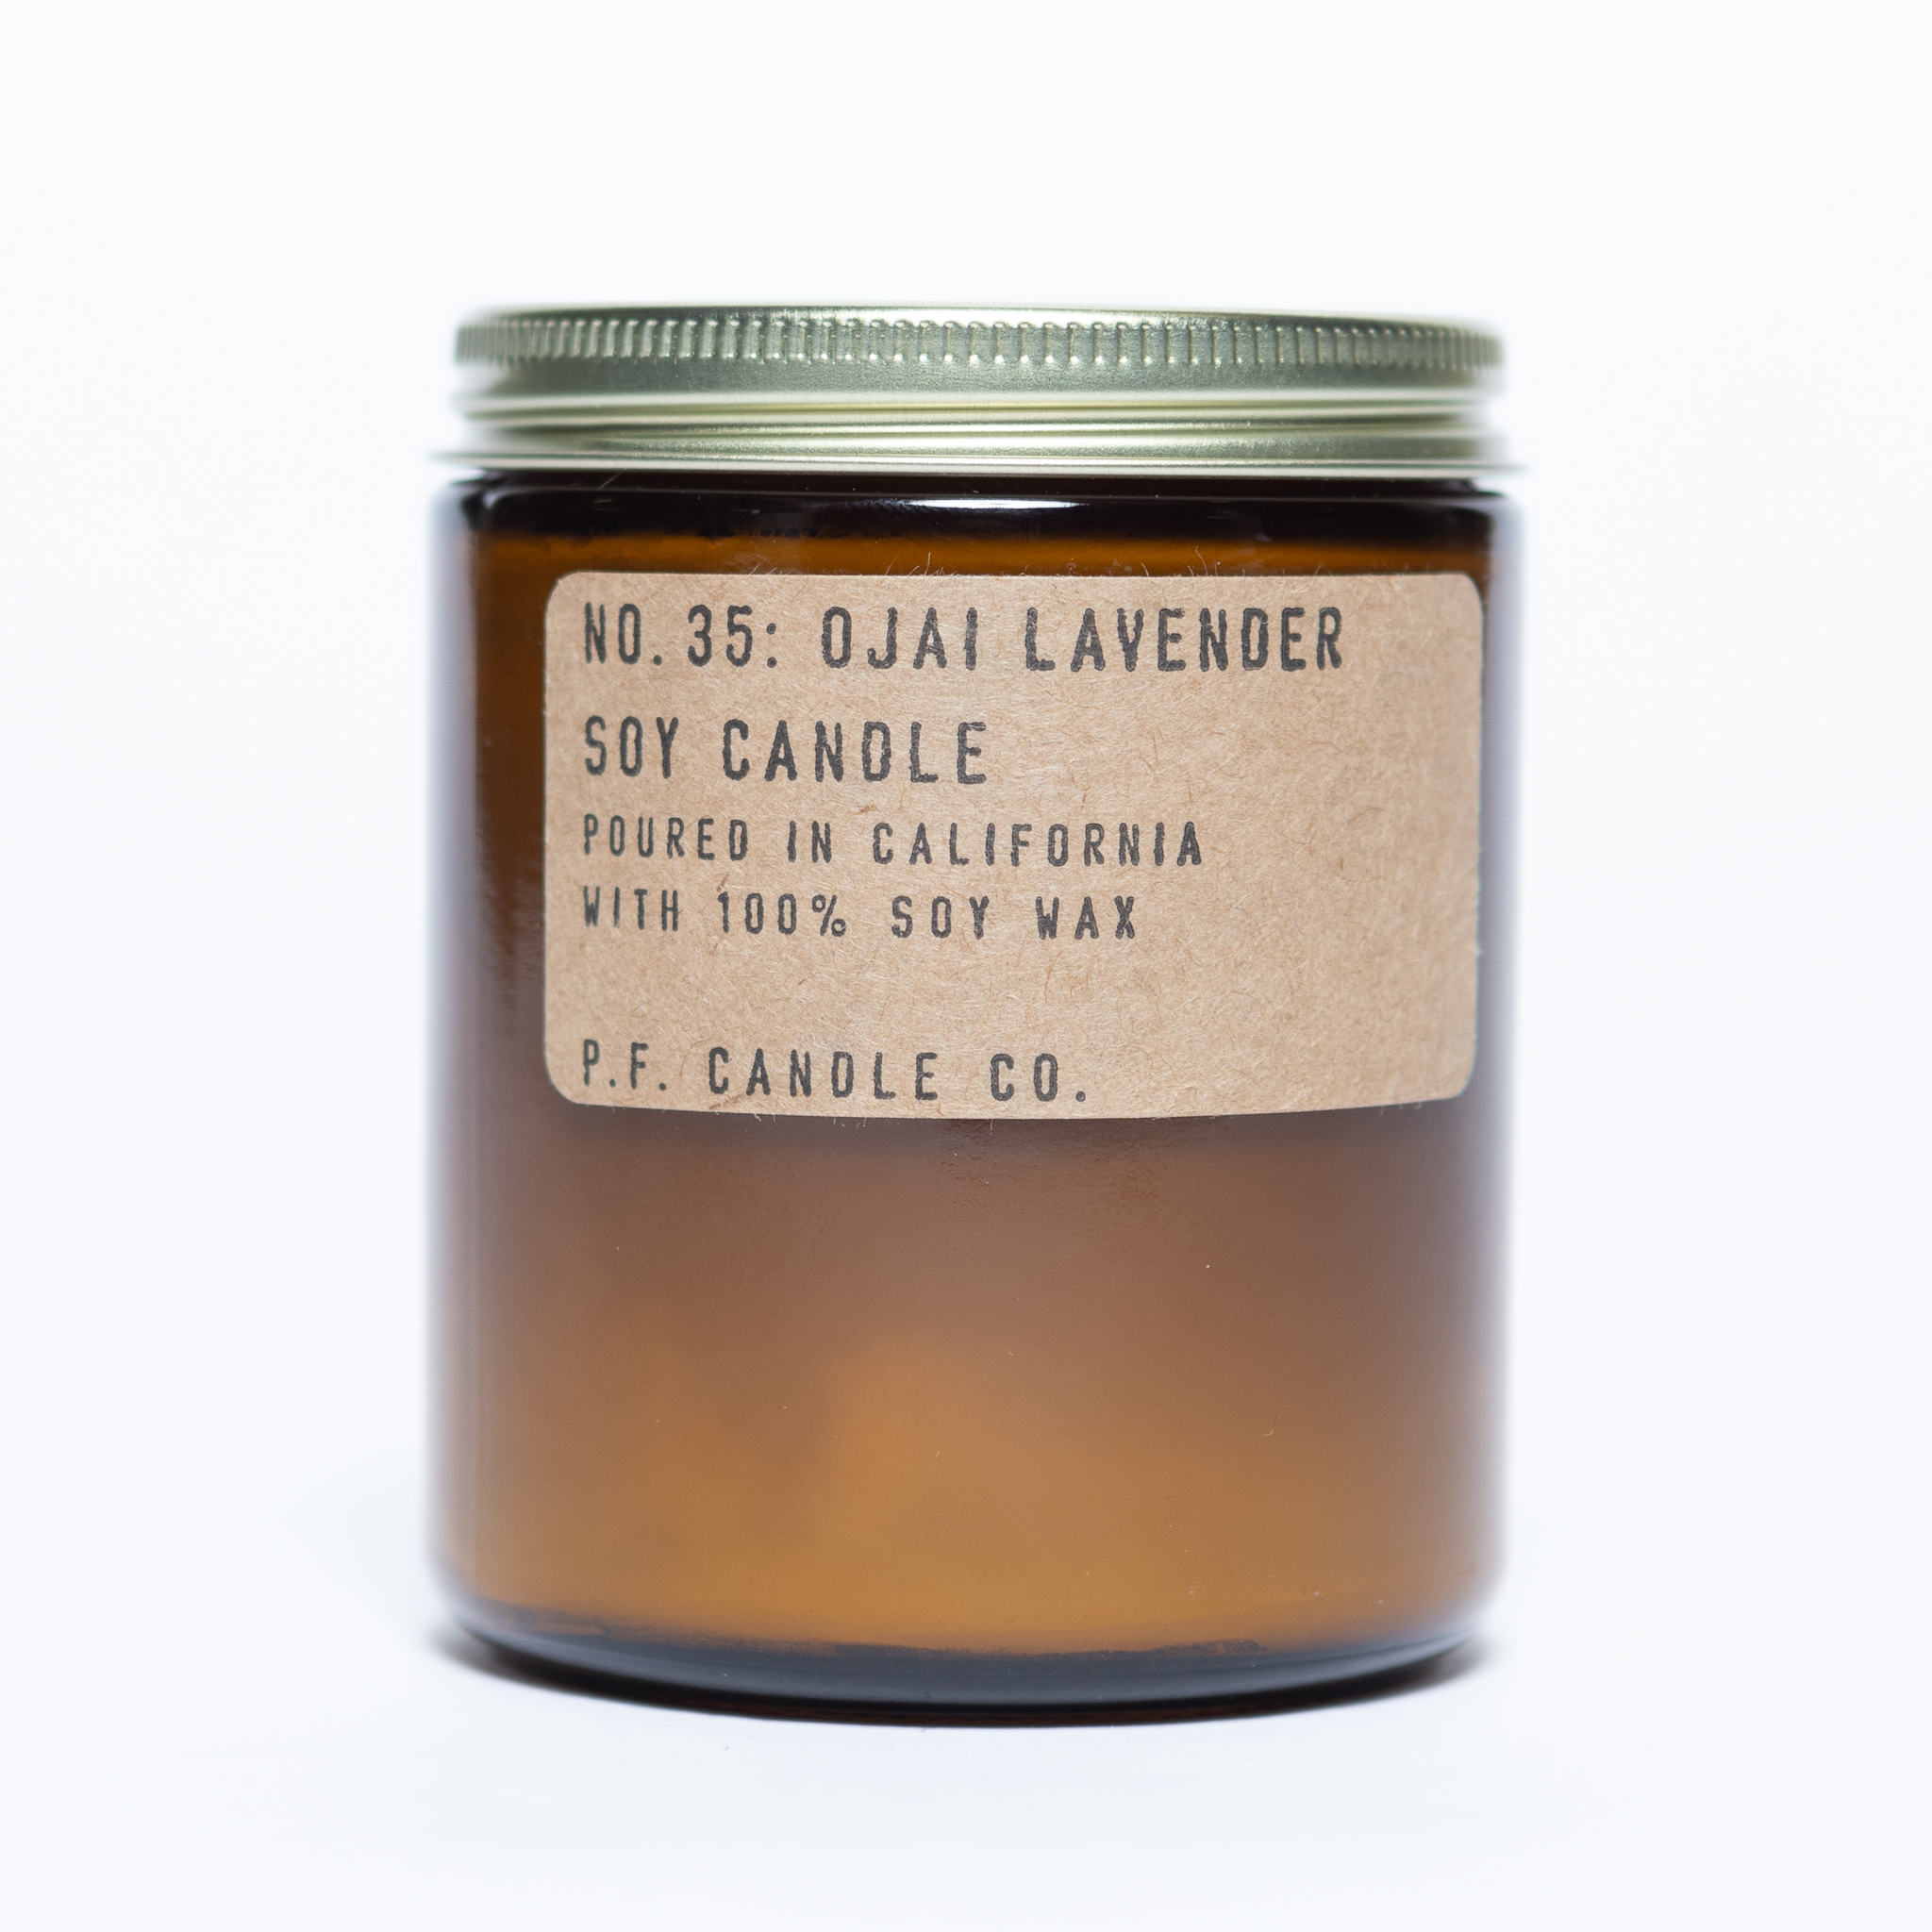 Ojai Lavender 7.2oz candle by pf candle co.